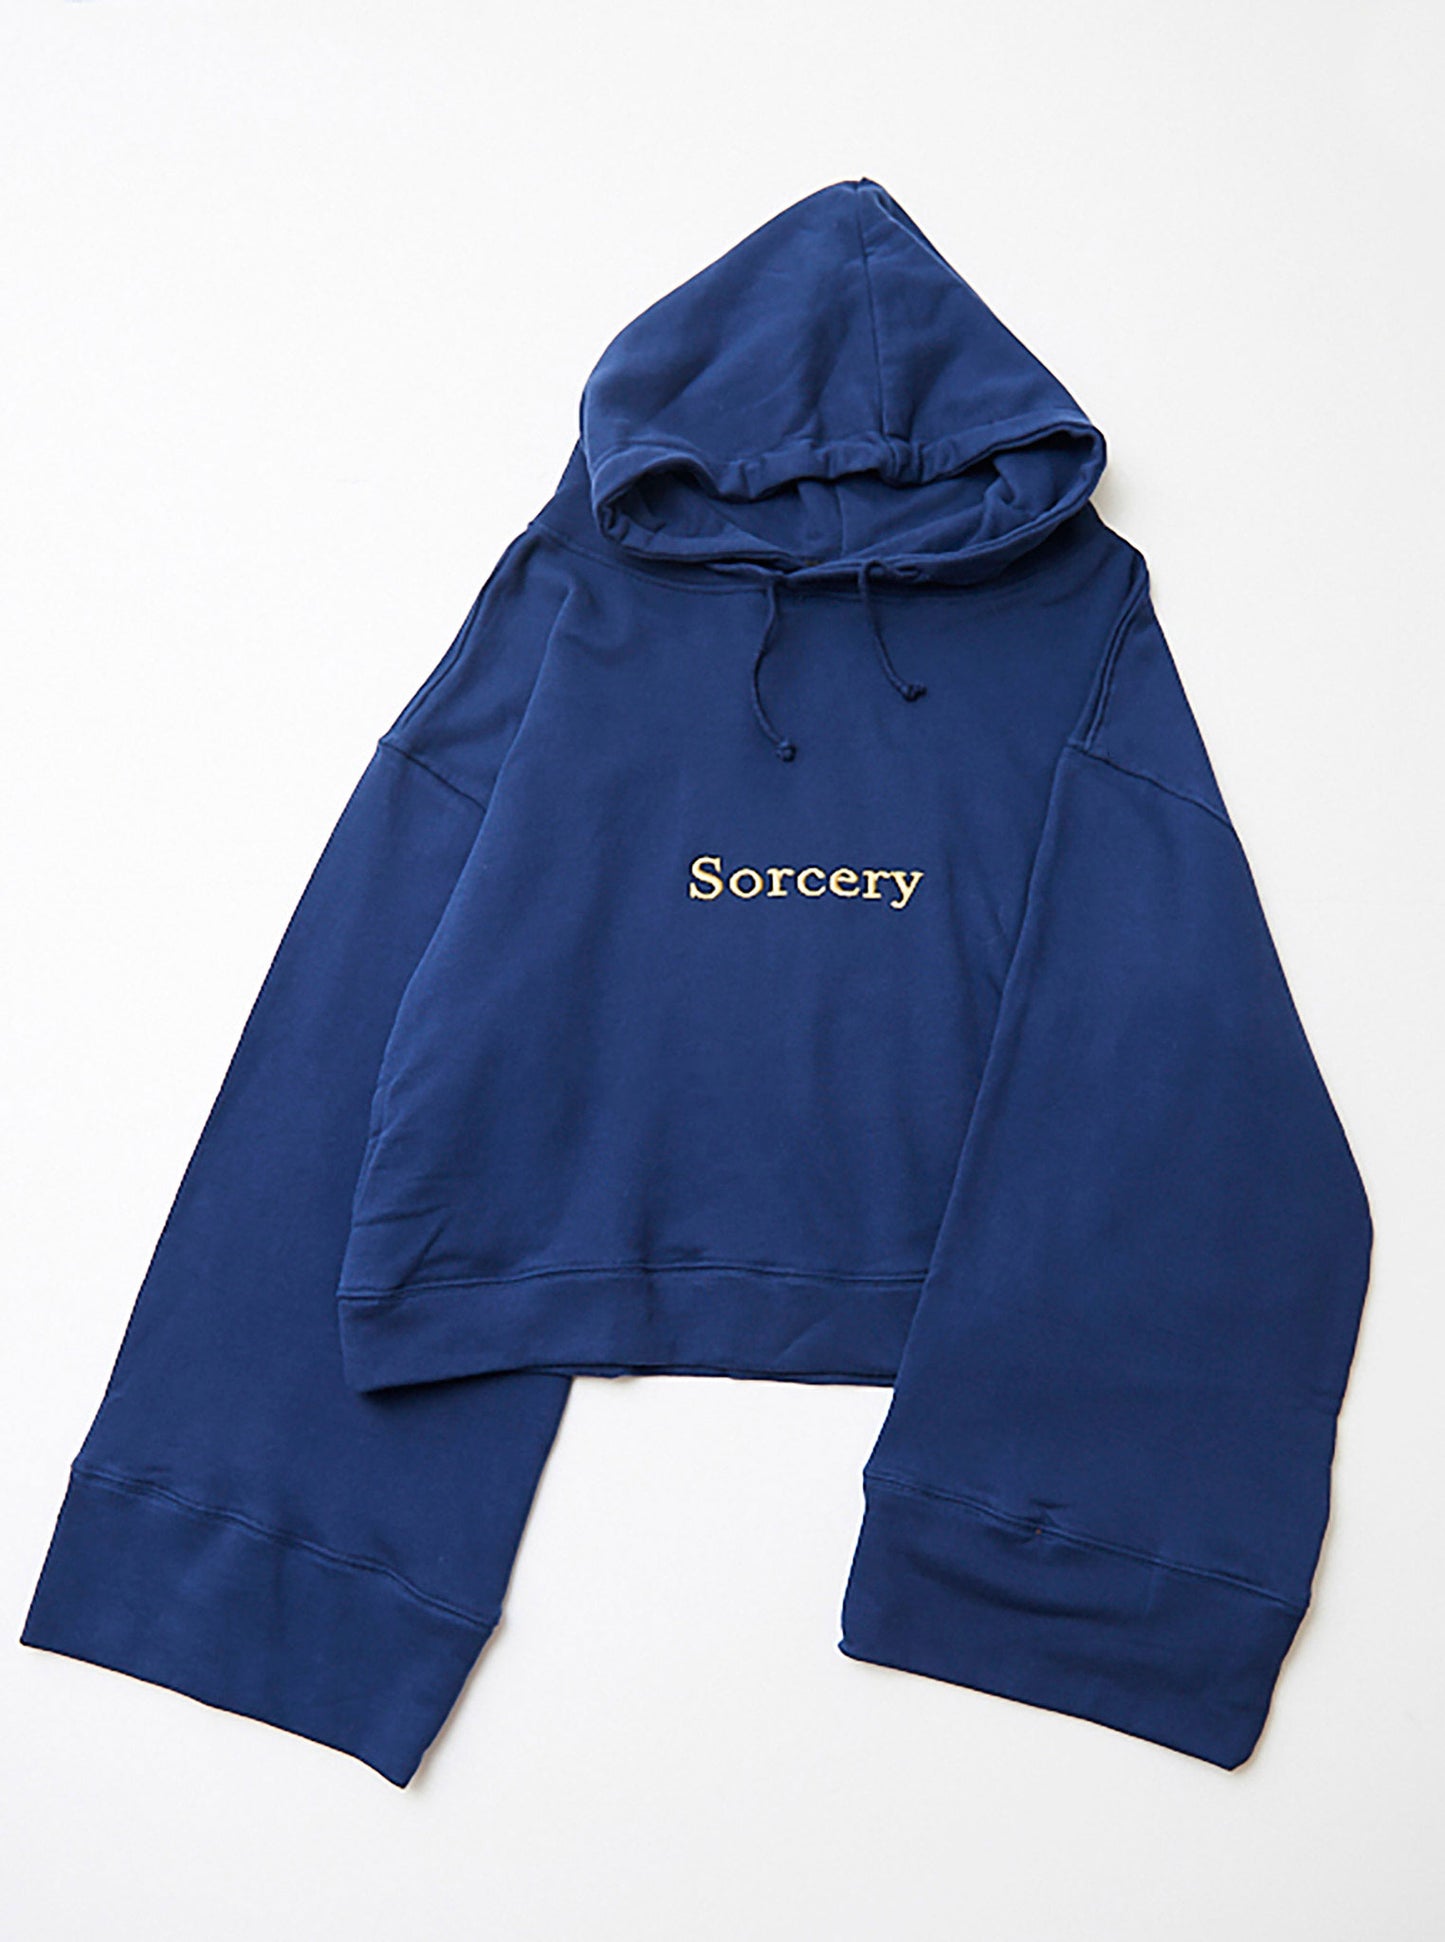 Vinti Andrews Cropped Navy Hoody w/ "Sorcery" Golden Embroidery